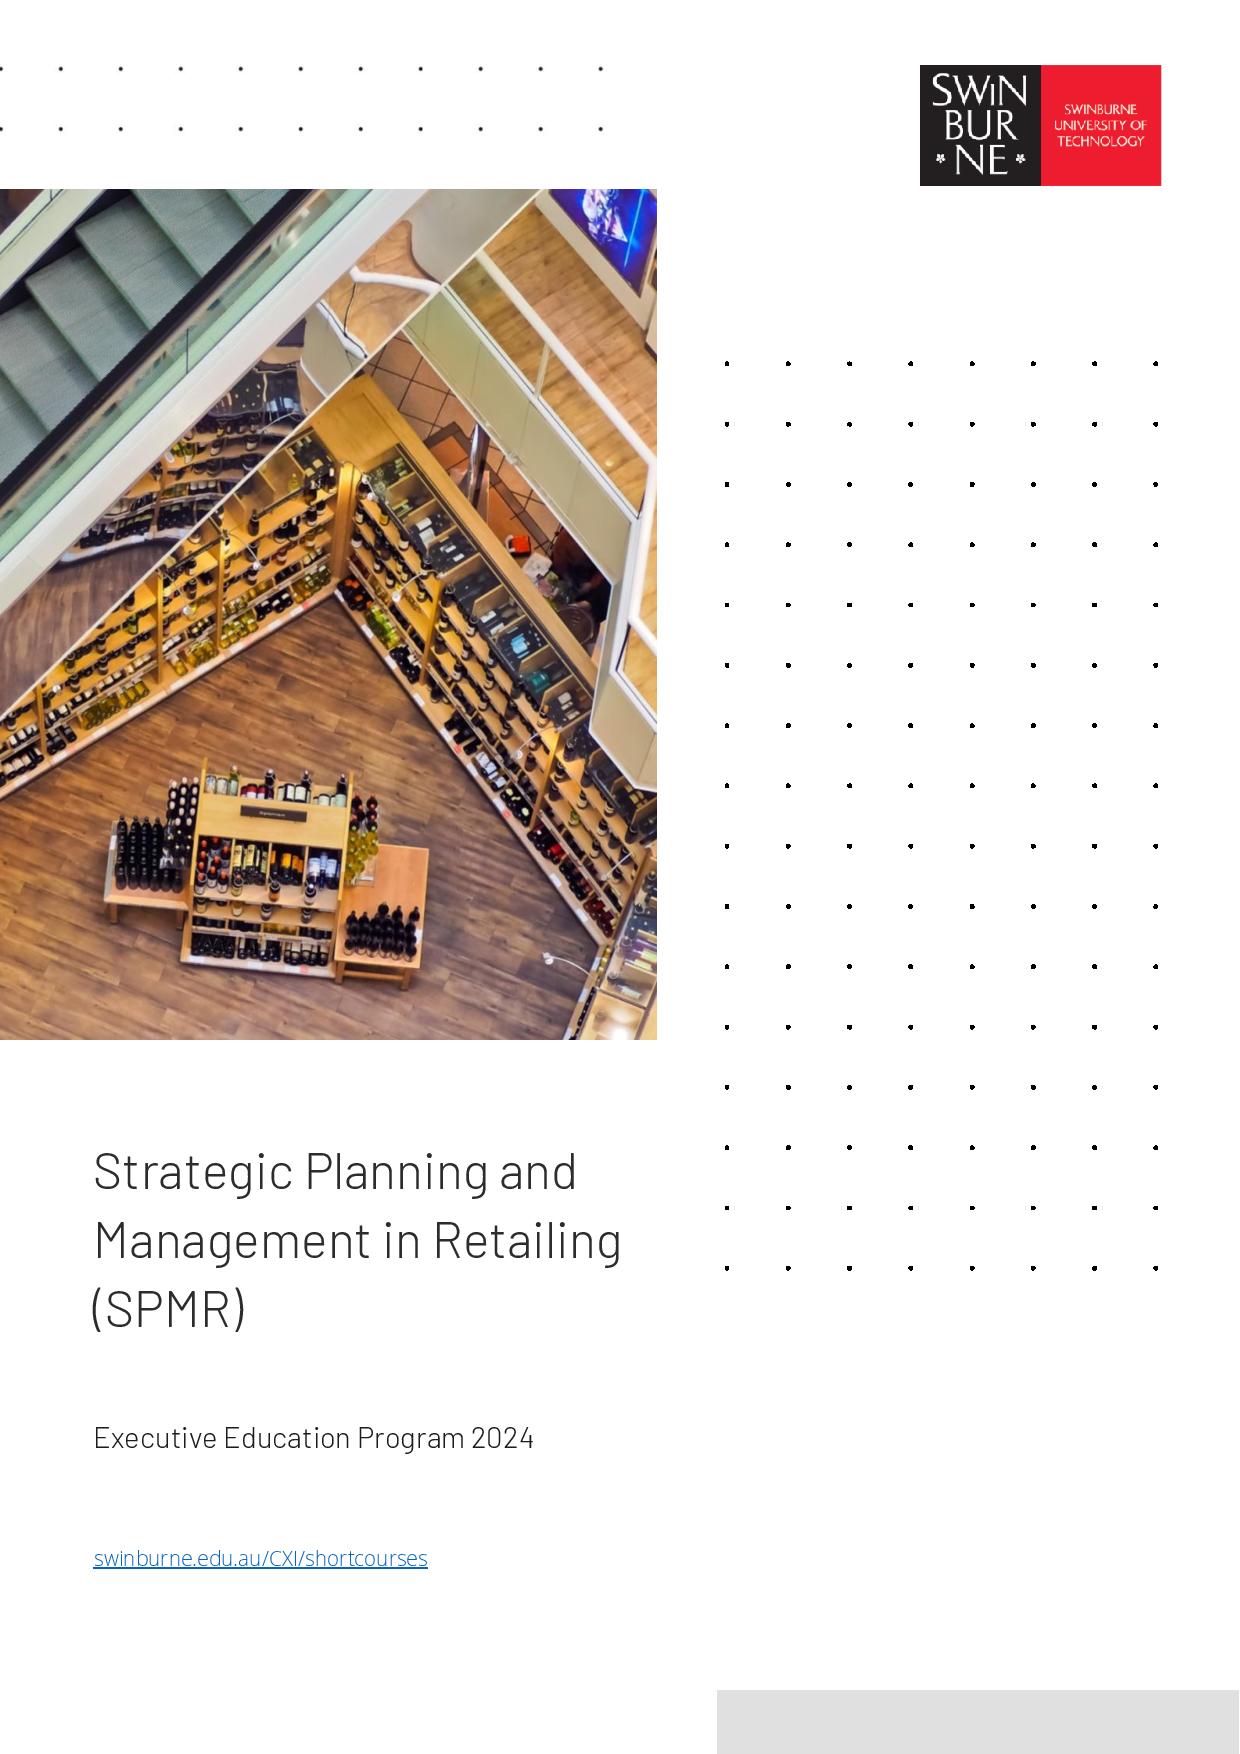 Strategic Planning and Management in Retailing